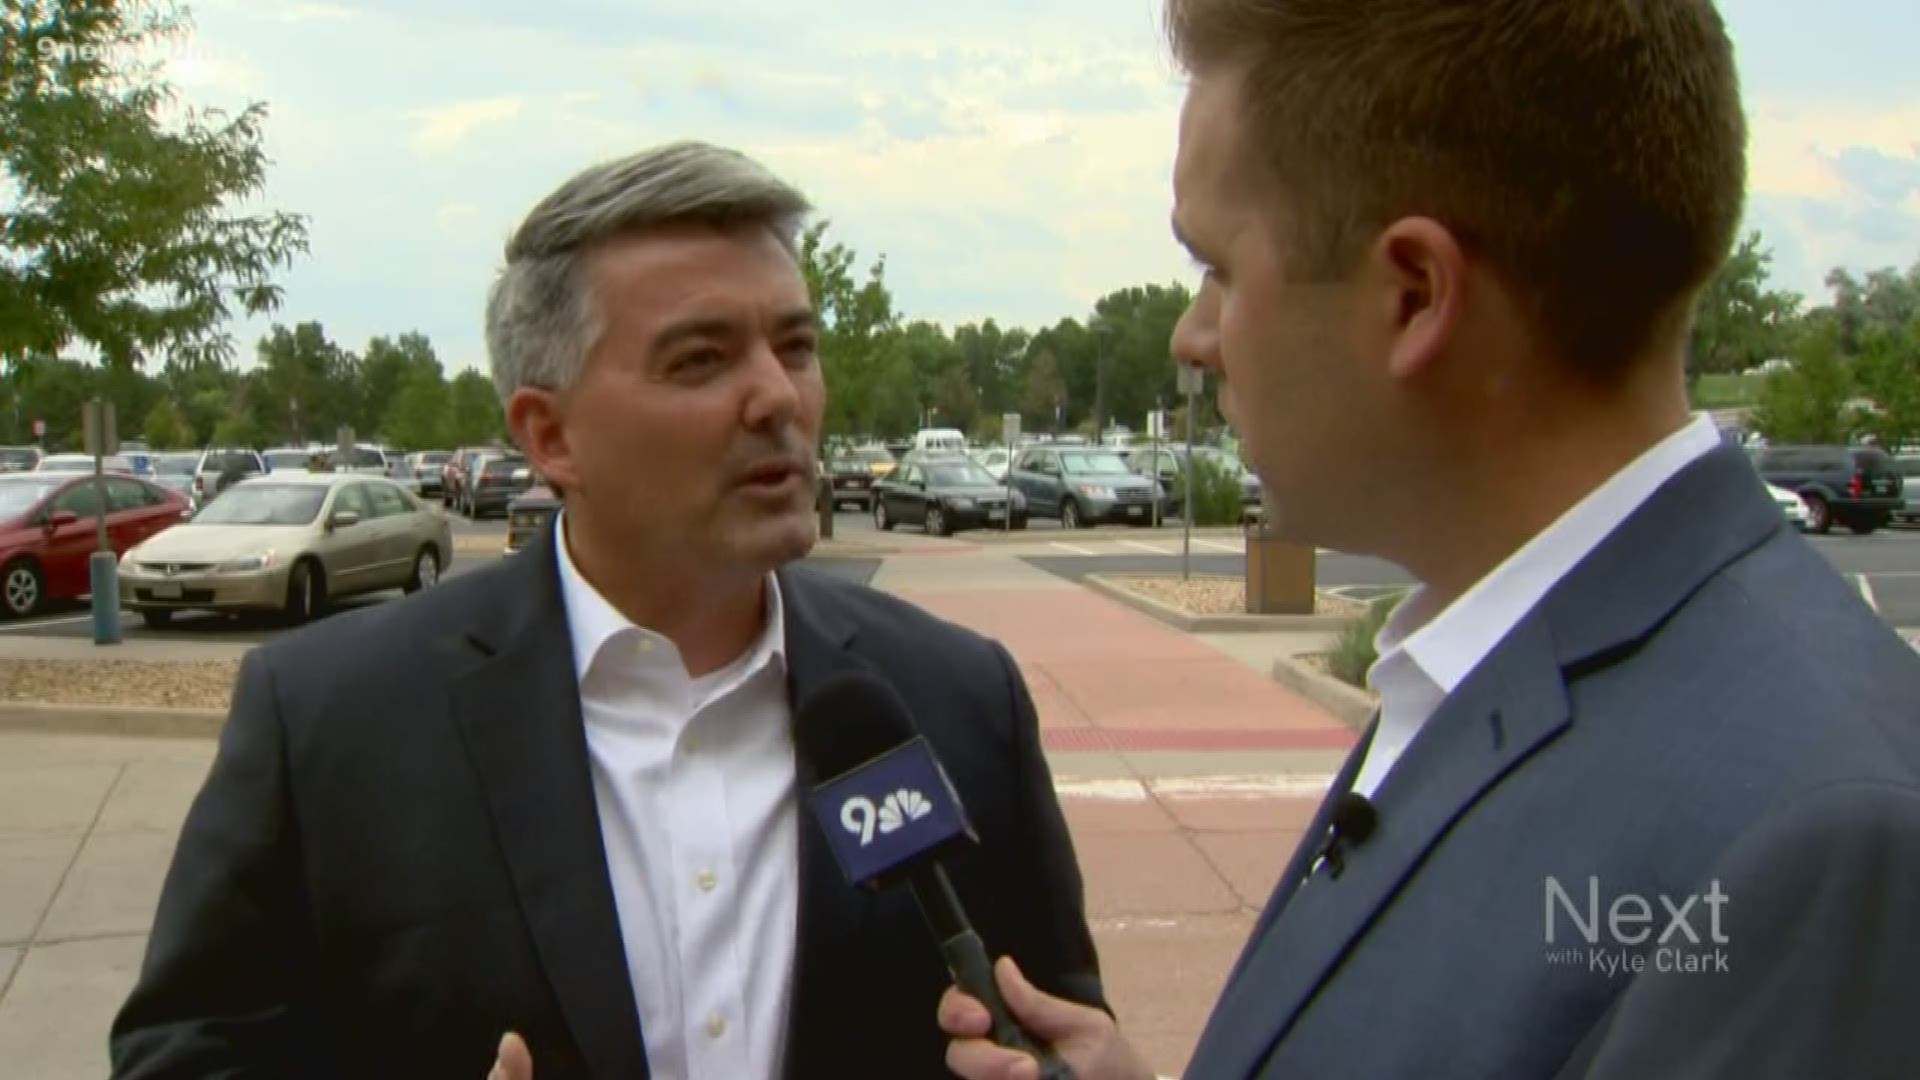 Kyle asked Sen. Cory Gardner about Pres. Trump's call for a red flag policy, about his thoughts on the President's tweets targeting congresswomen of color, and if the issue at the border is an "invasion" or "humanitarian crisis."